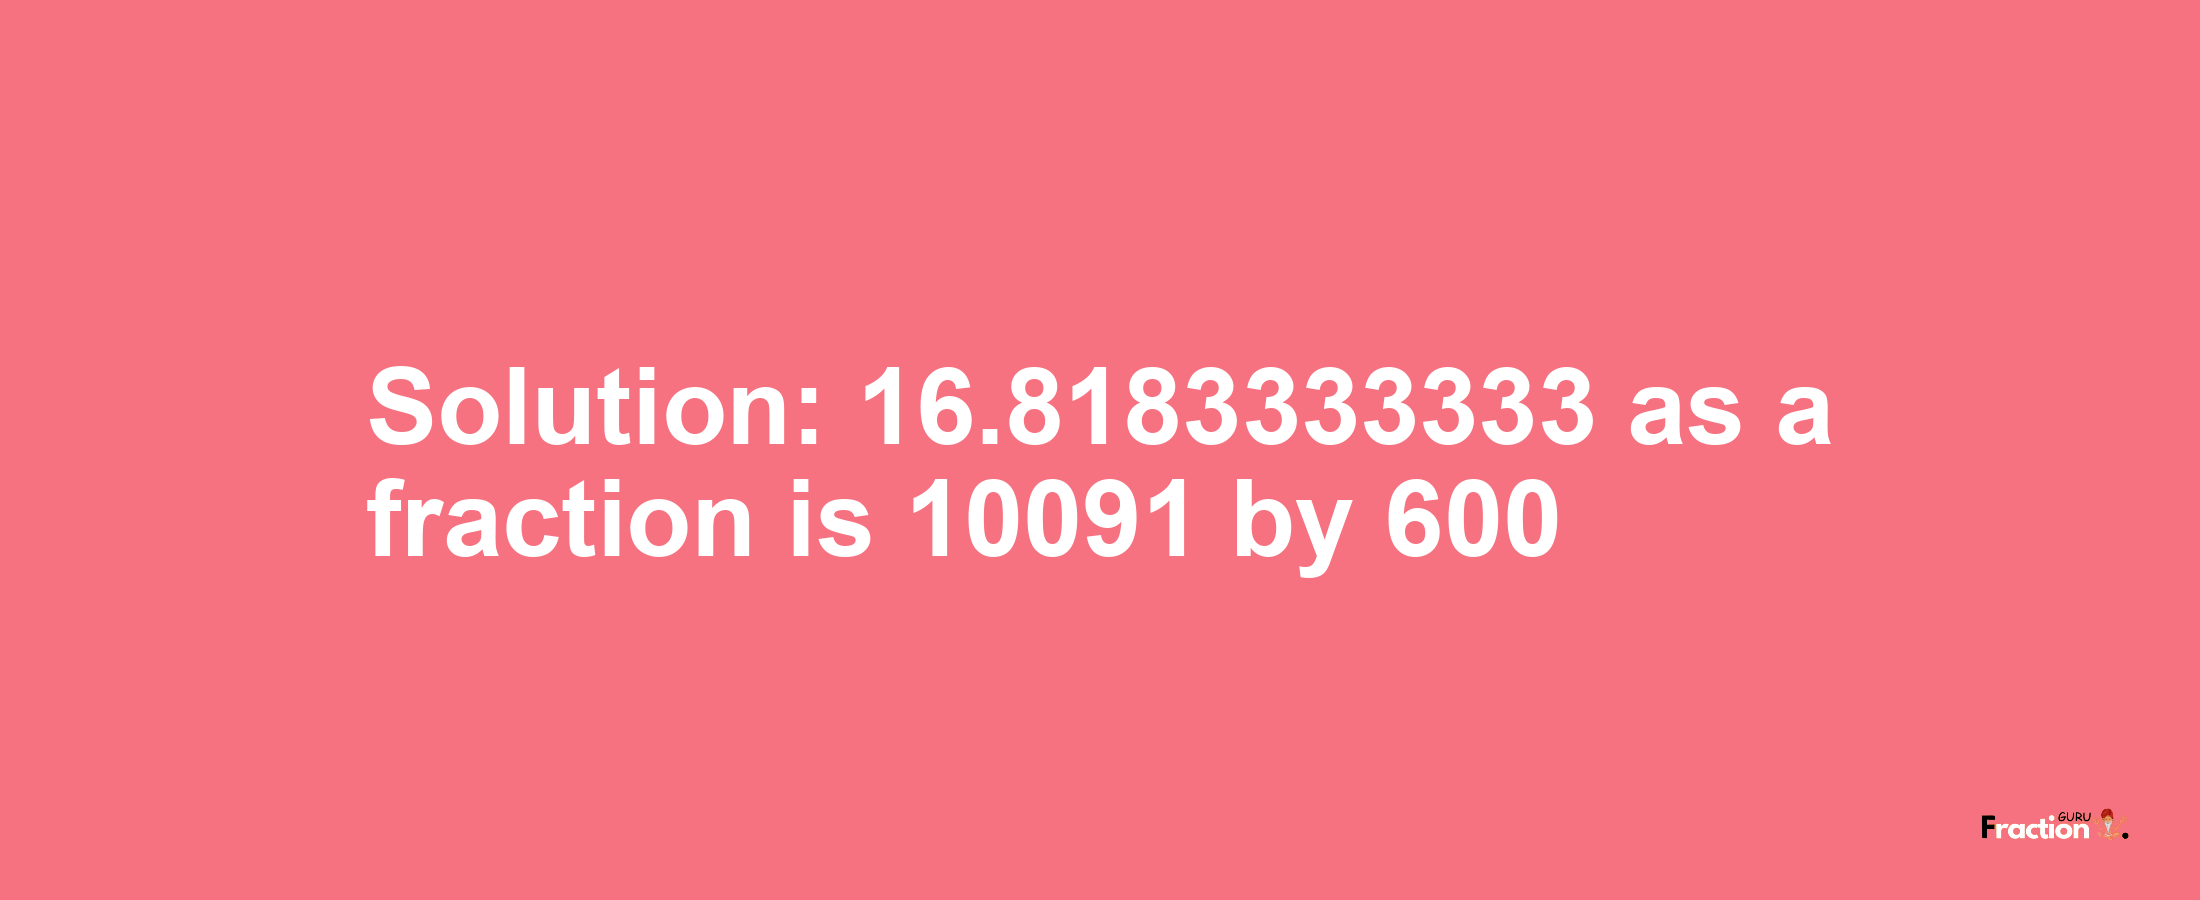 Solution:16.8183333333 as a fraction is 10091/600